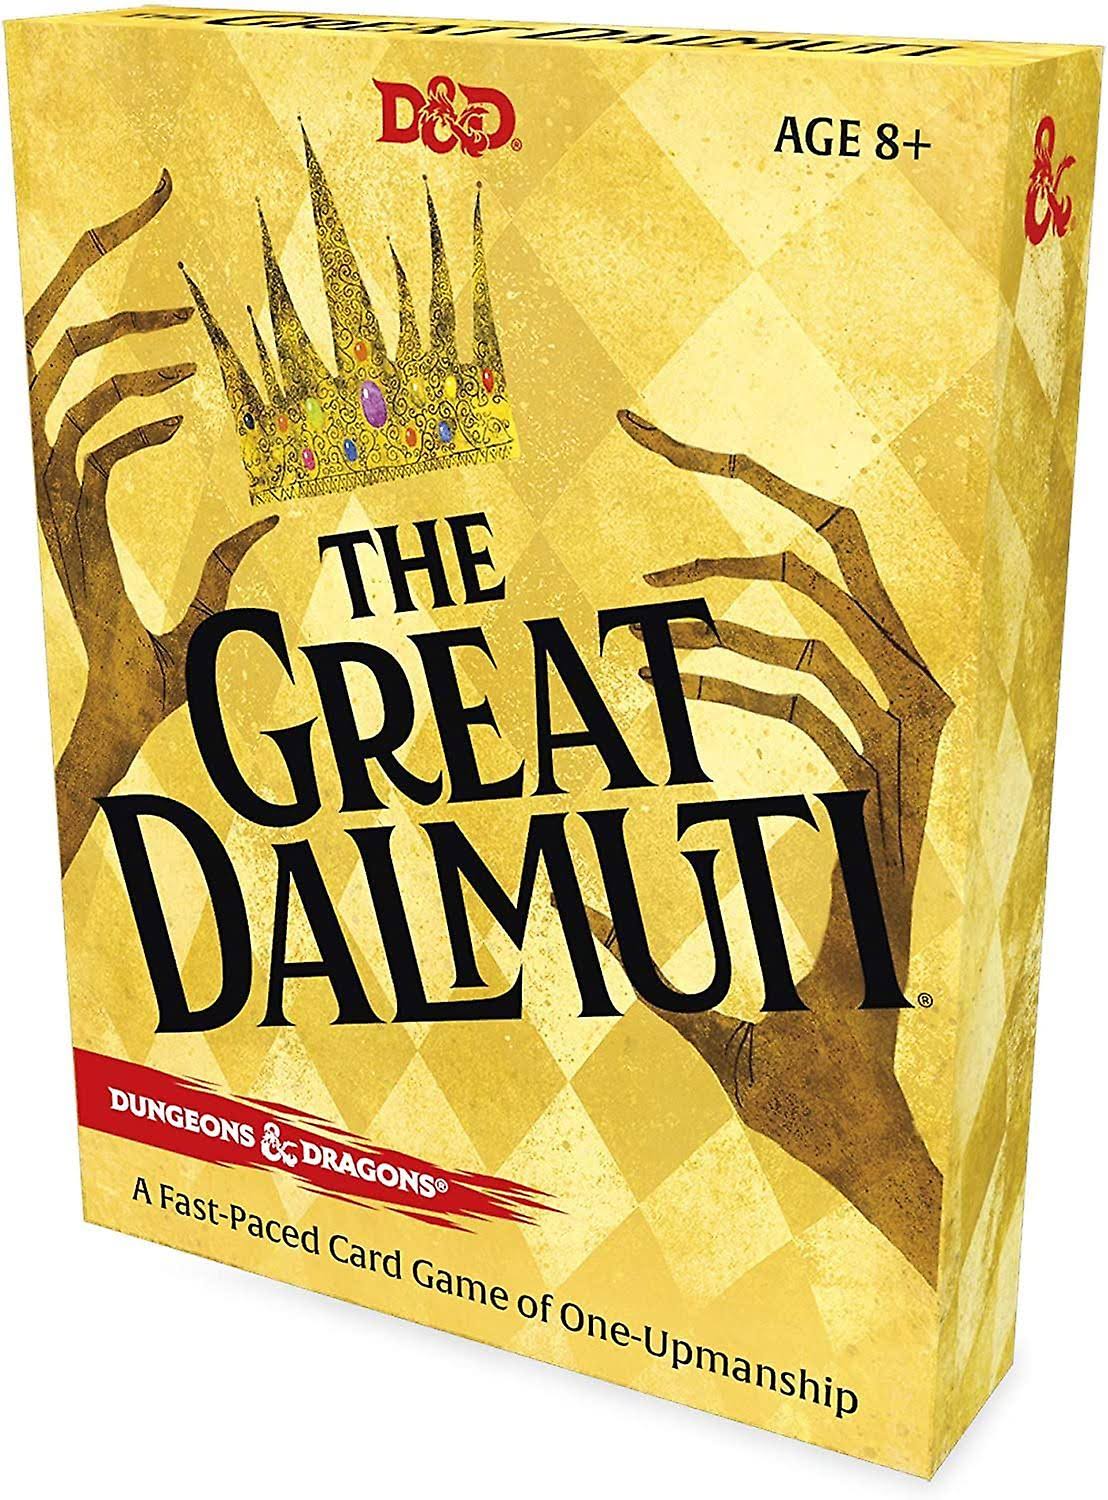 Dungeons & Dragons (DDN) The Great Dalmuti Card Game